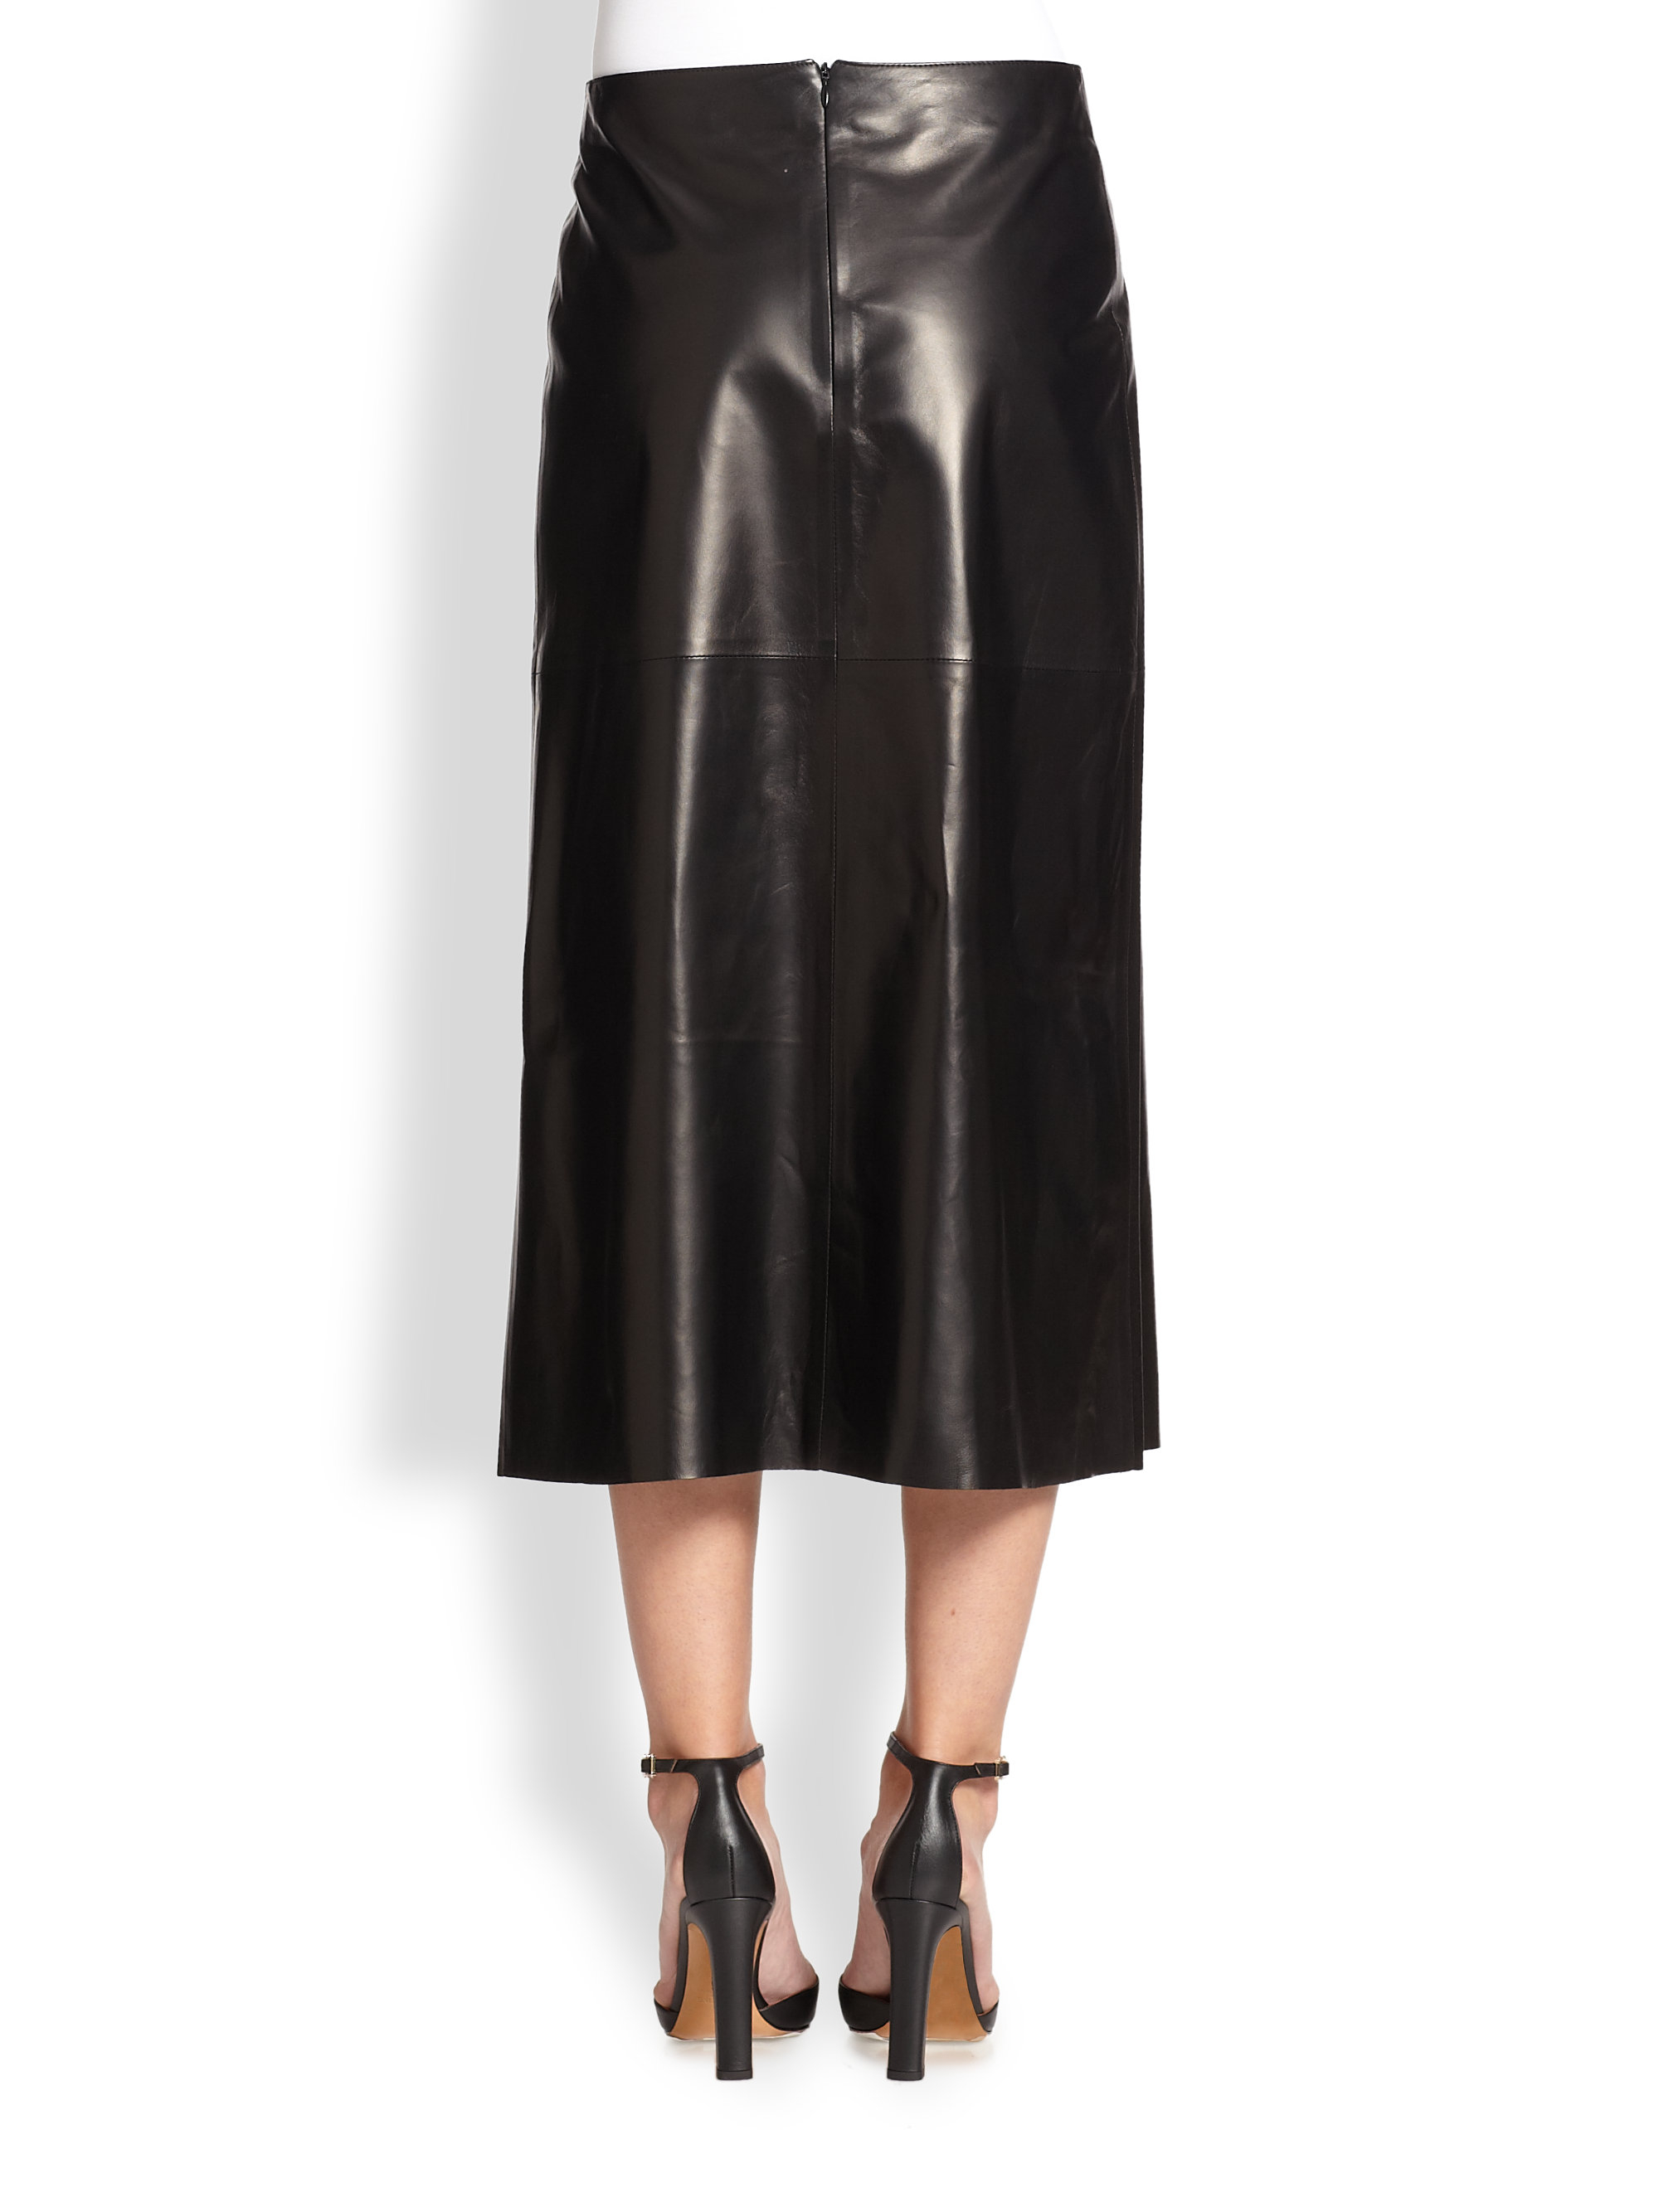 Valentino Paneled Leather Skirt in Black | Lyst